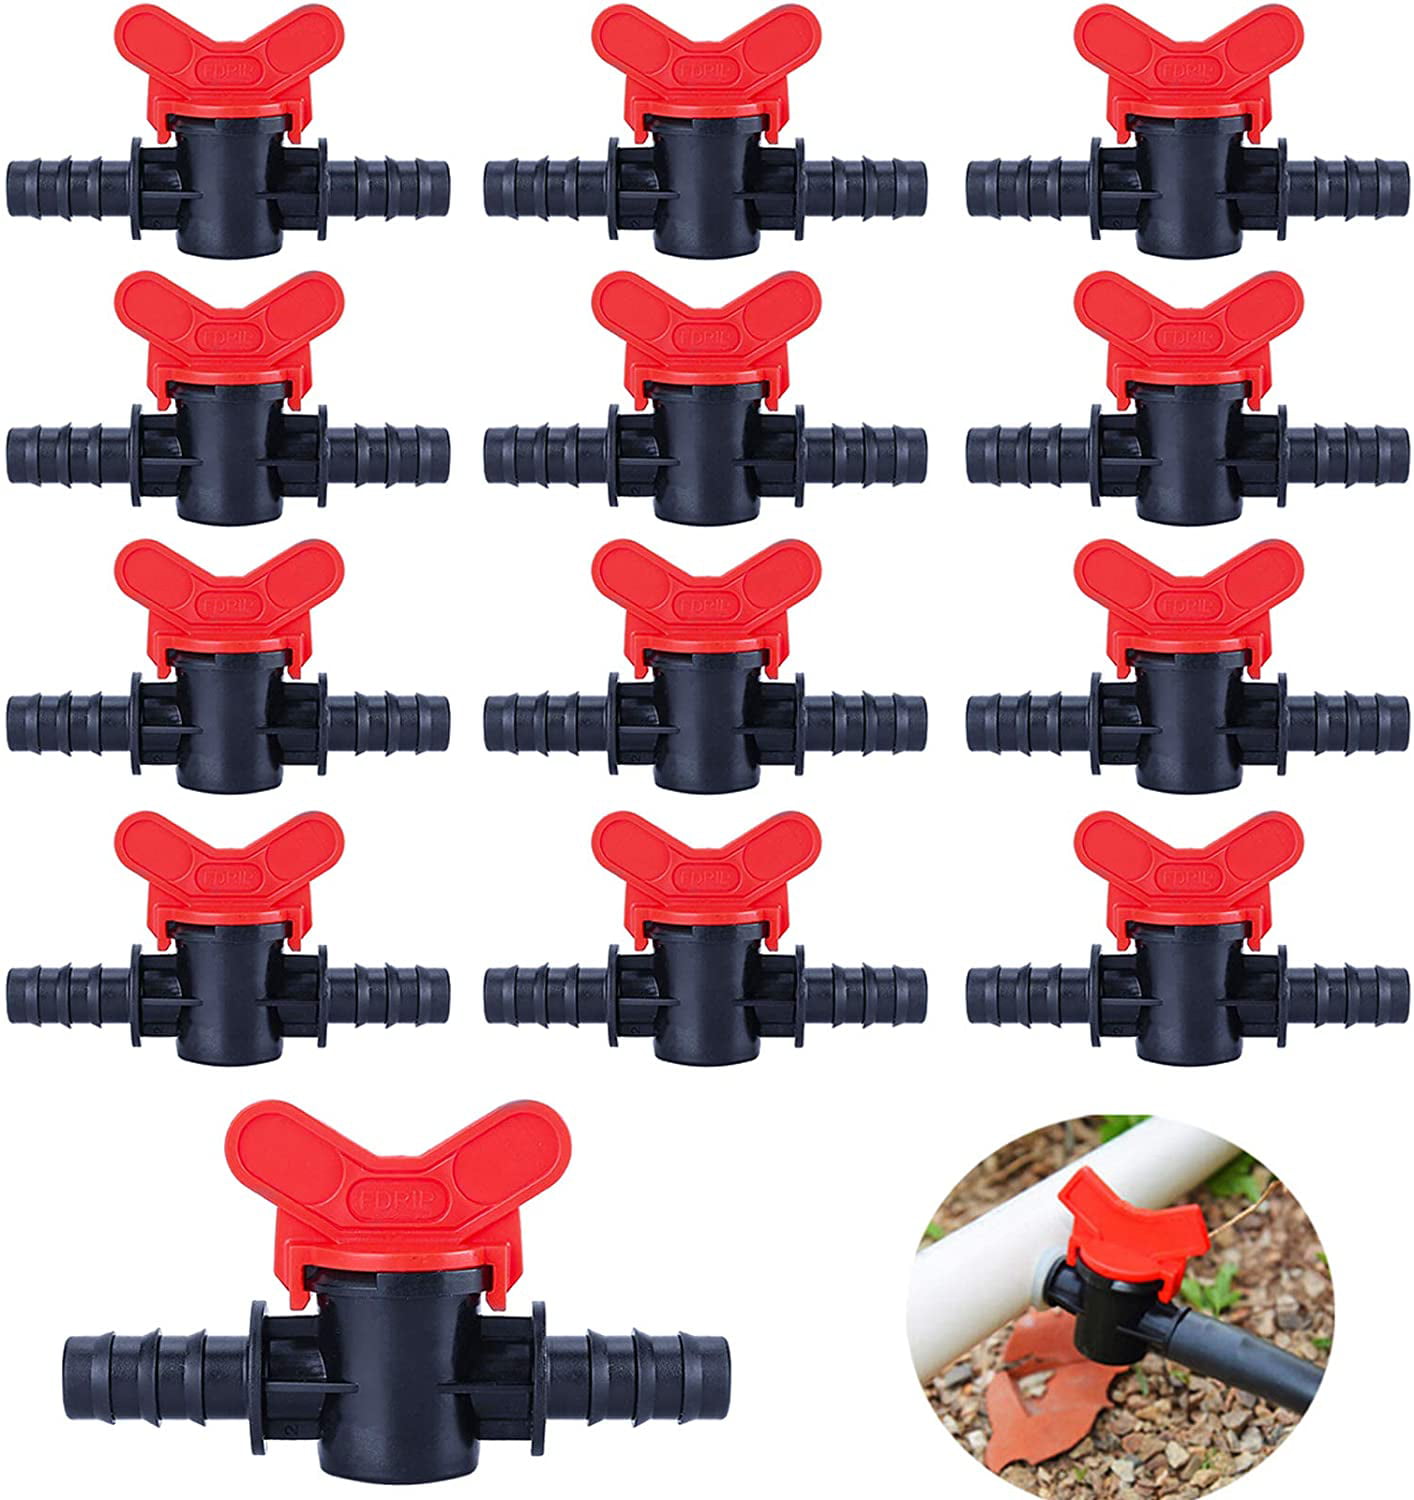 5Pcs 16mm Ball Valve Barbed Water Hose Pipe Drip Irrigation Connector Garden 